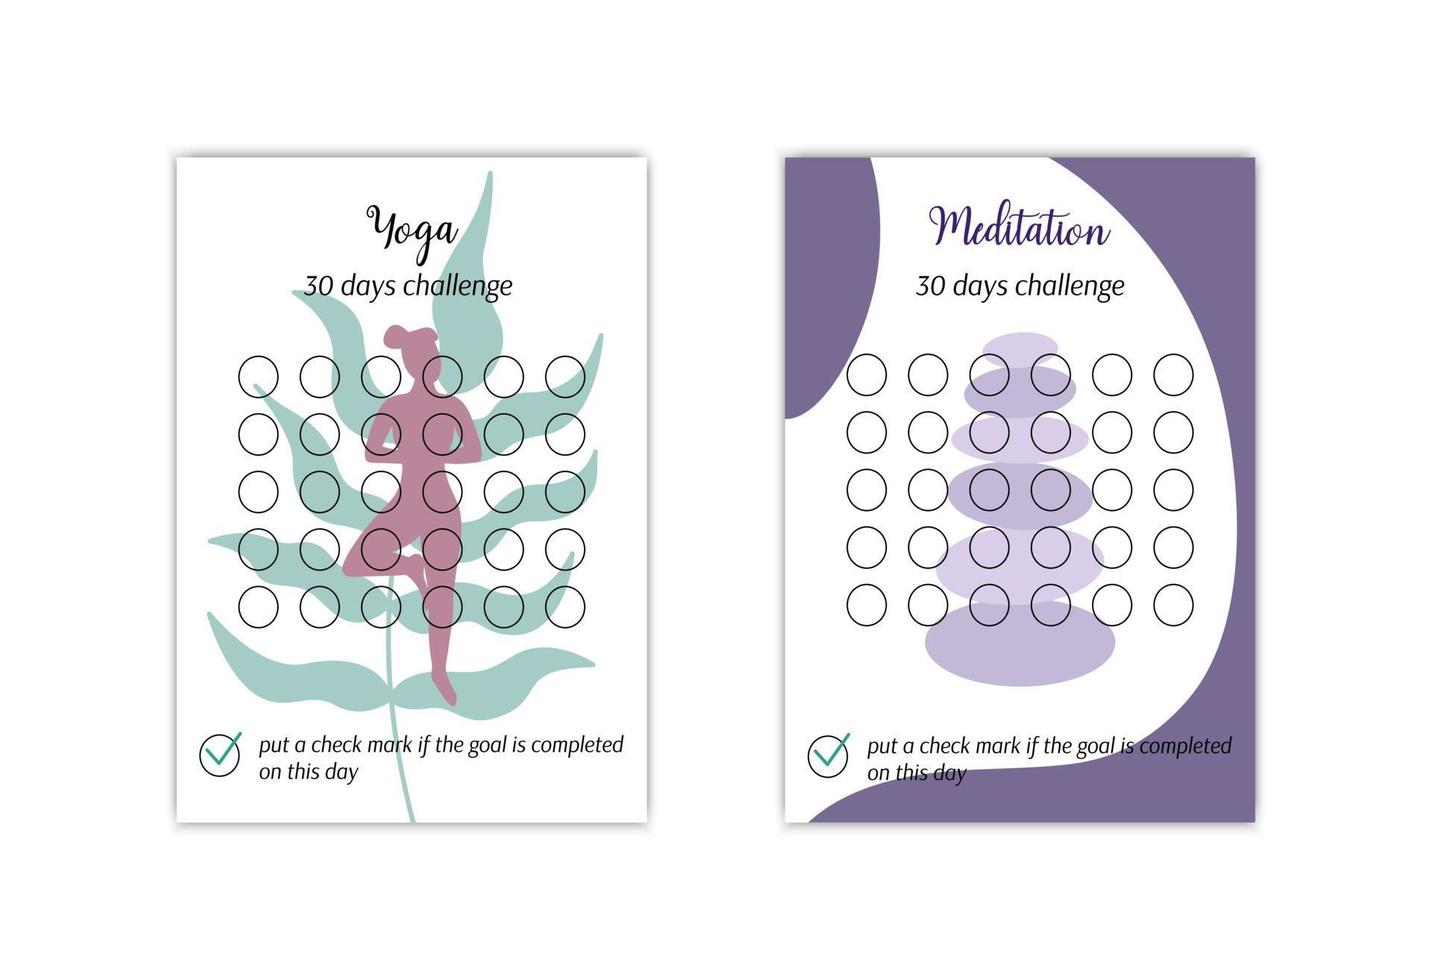 Yoga and meditation habits tracker templates set. Personal 30 days challenge. Healthy lifestyle habit tracker blanks. Vector illustration of paper worksheet for marking success in month